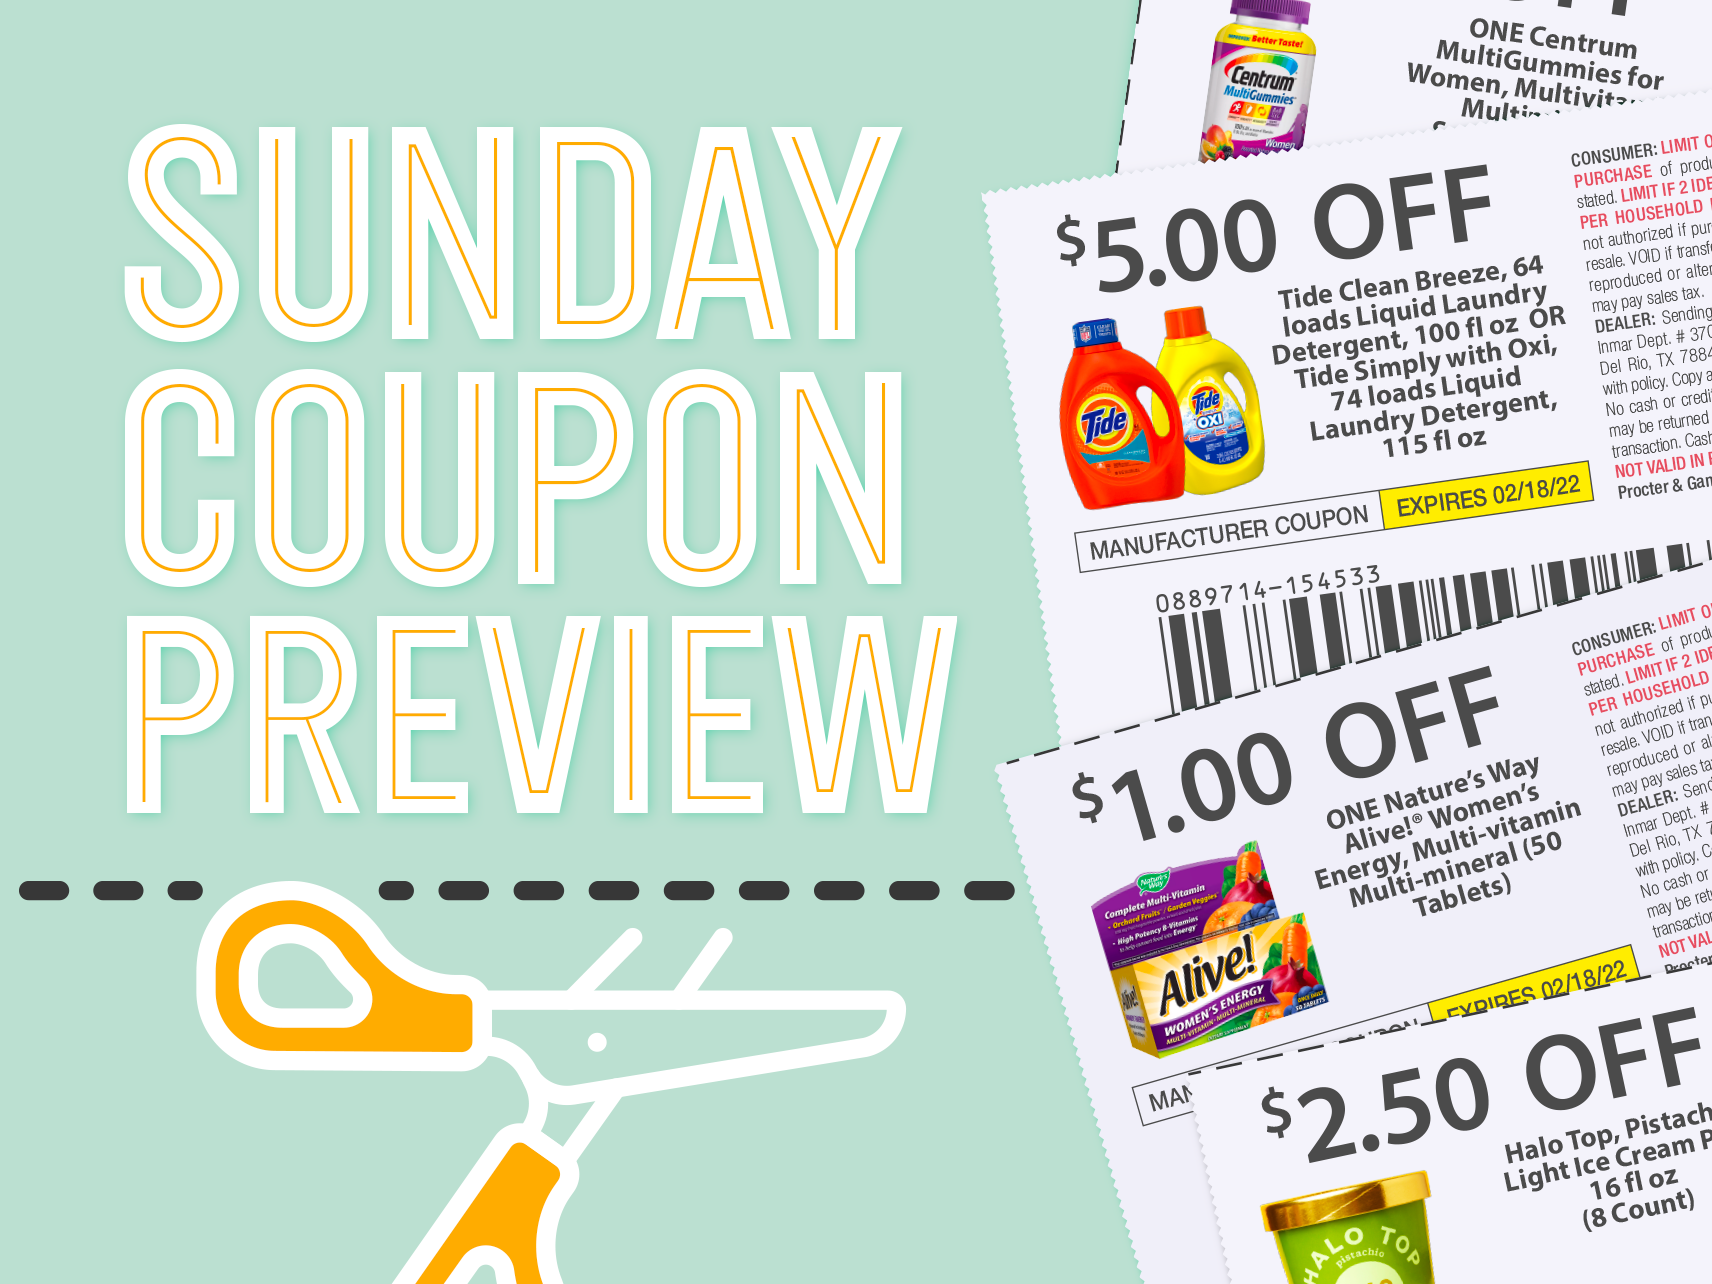 Sunday Coupon Preview For 7/24 – Two Inserts